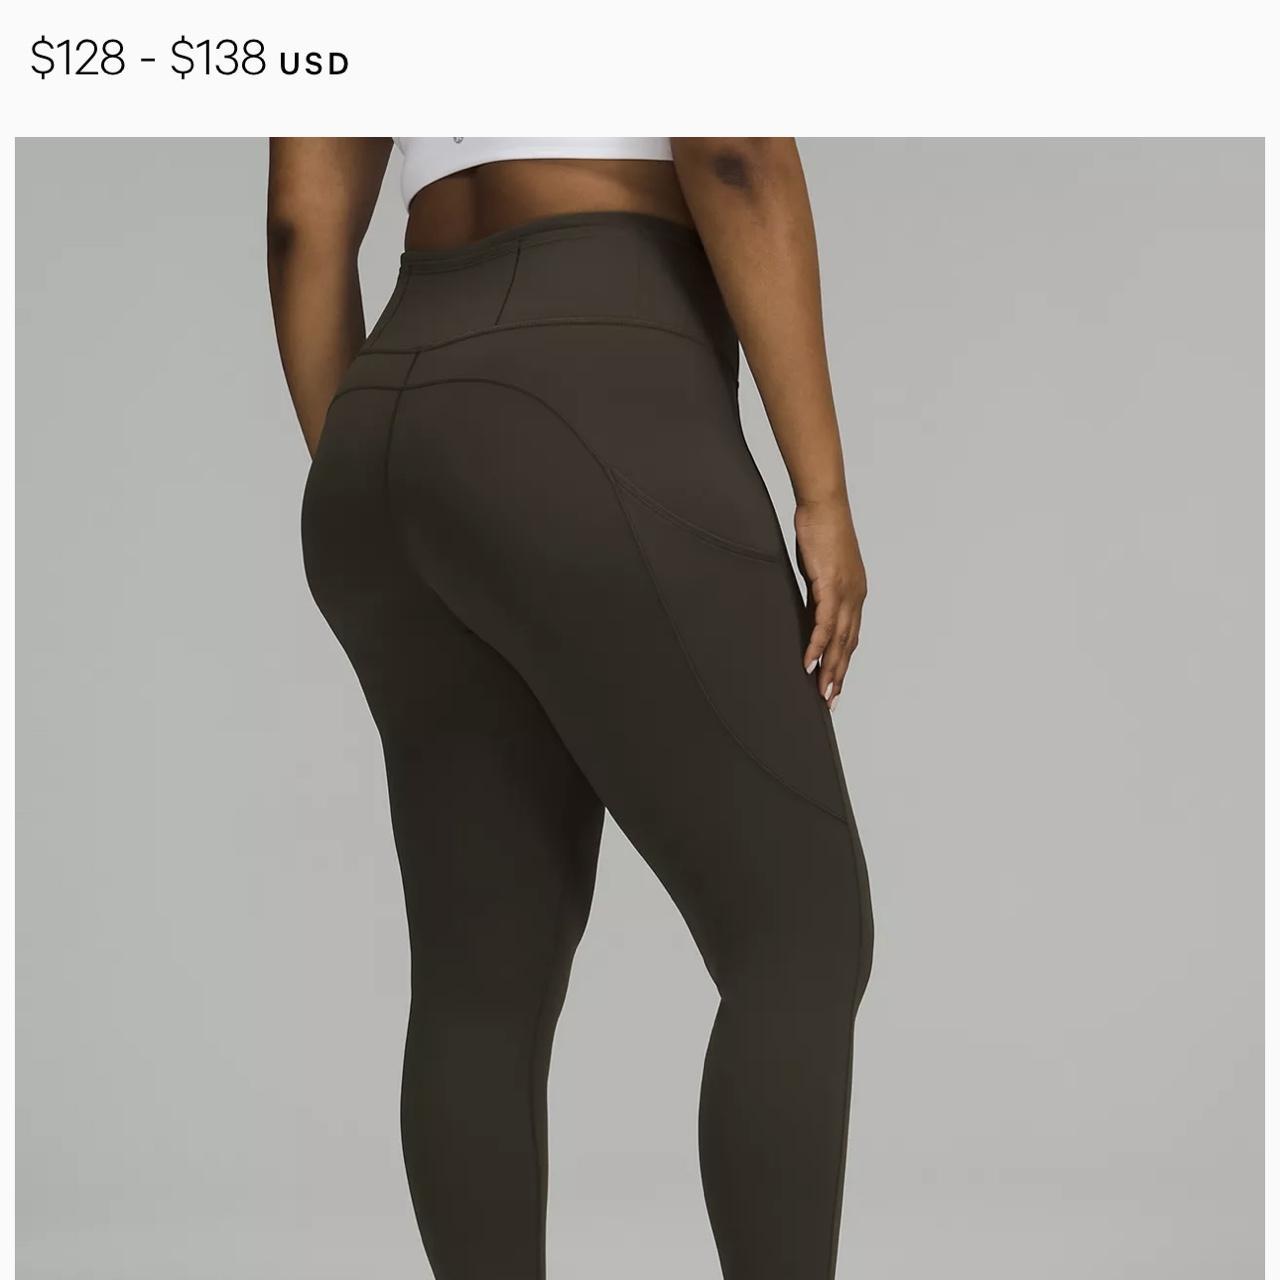 Lululemon Fast and Free High-Rise Tight 25” Size 4 - Depop